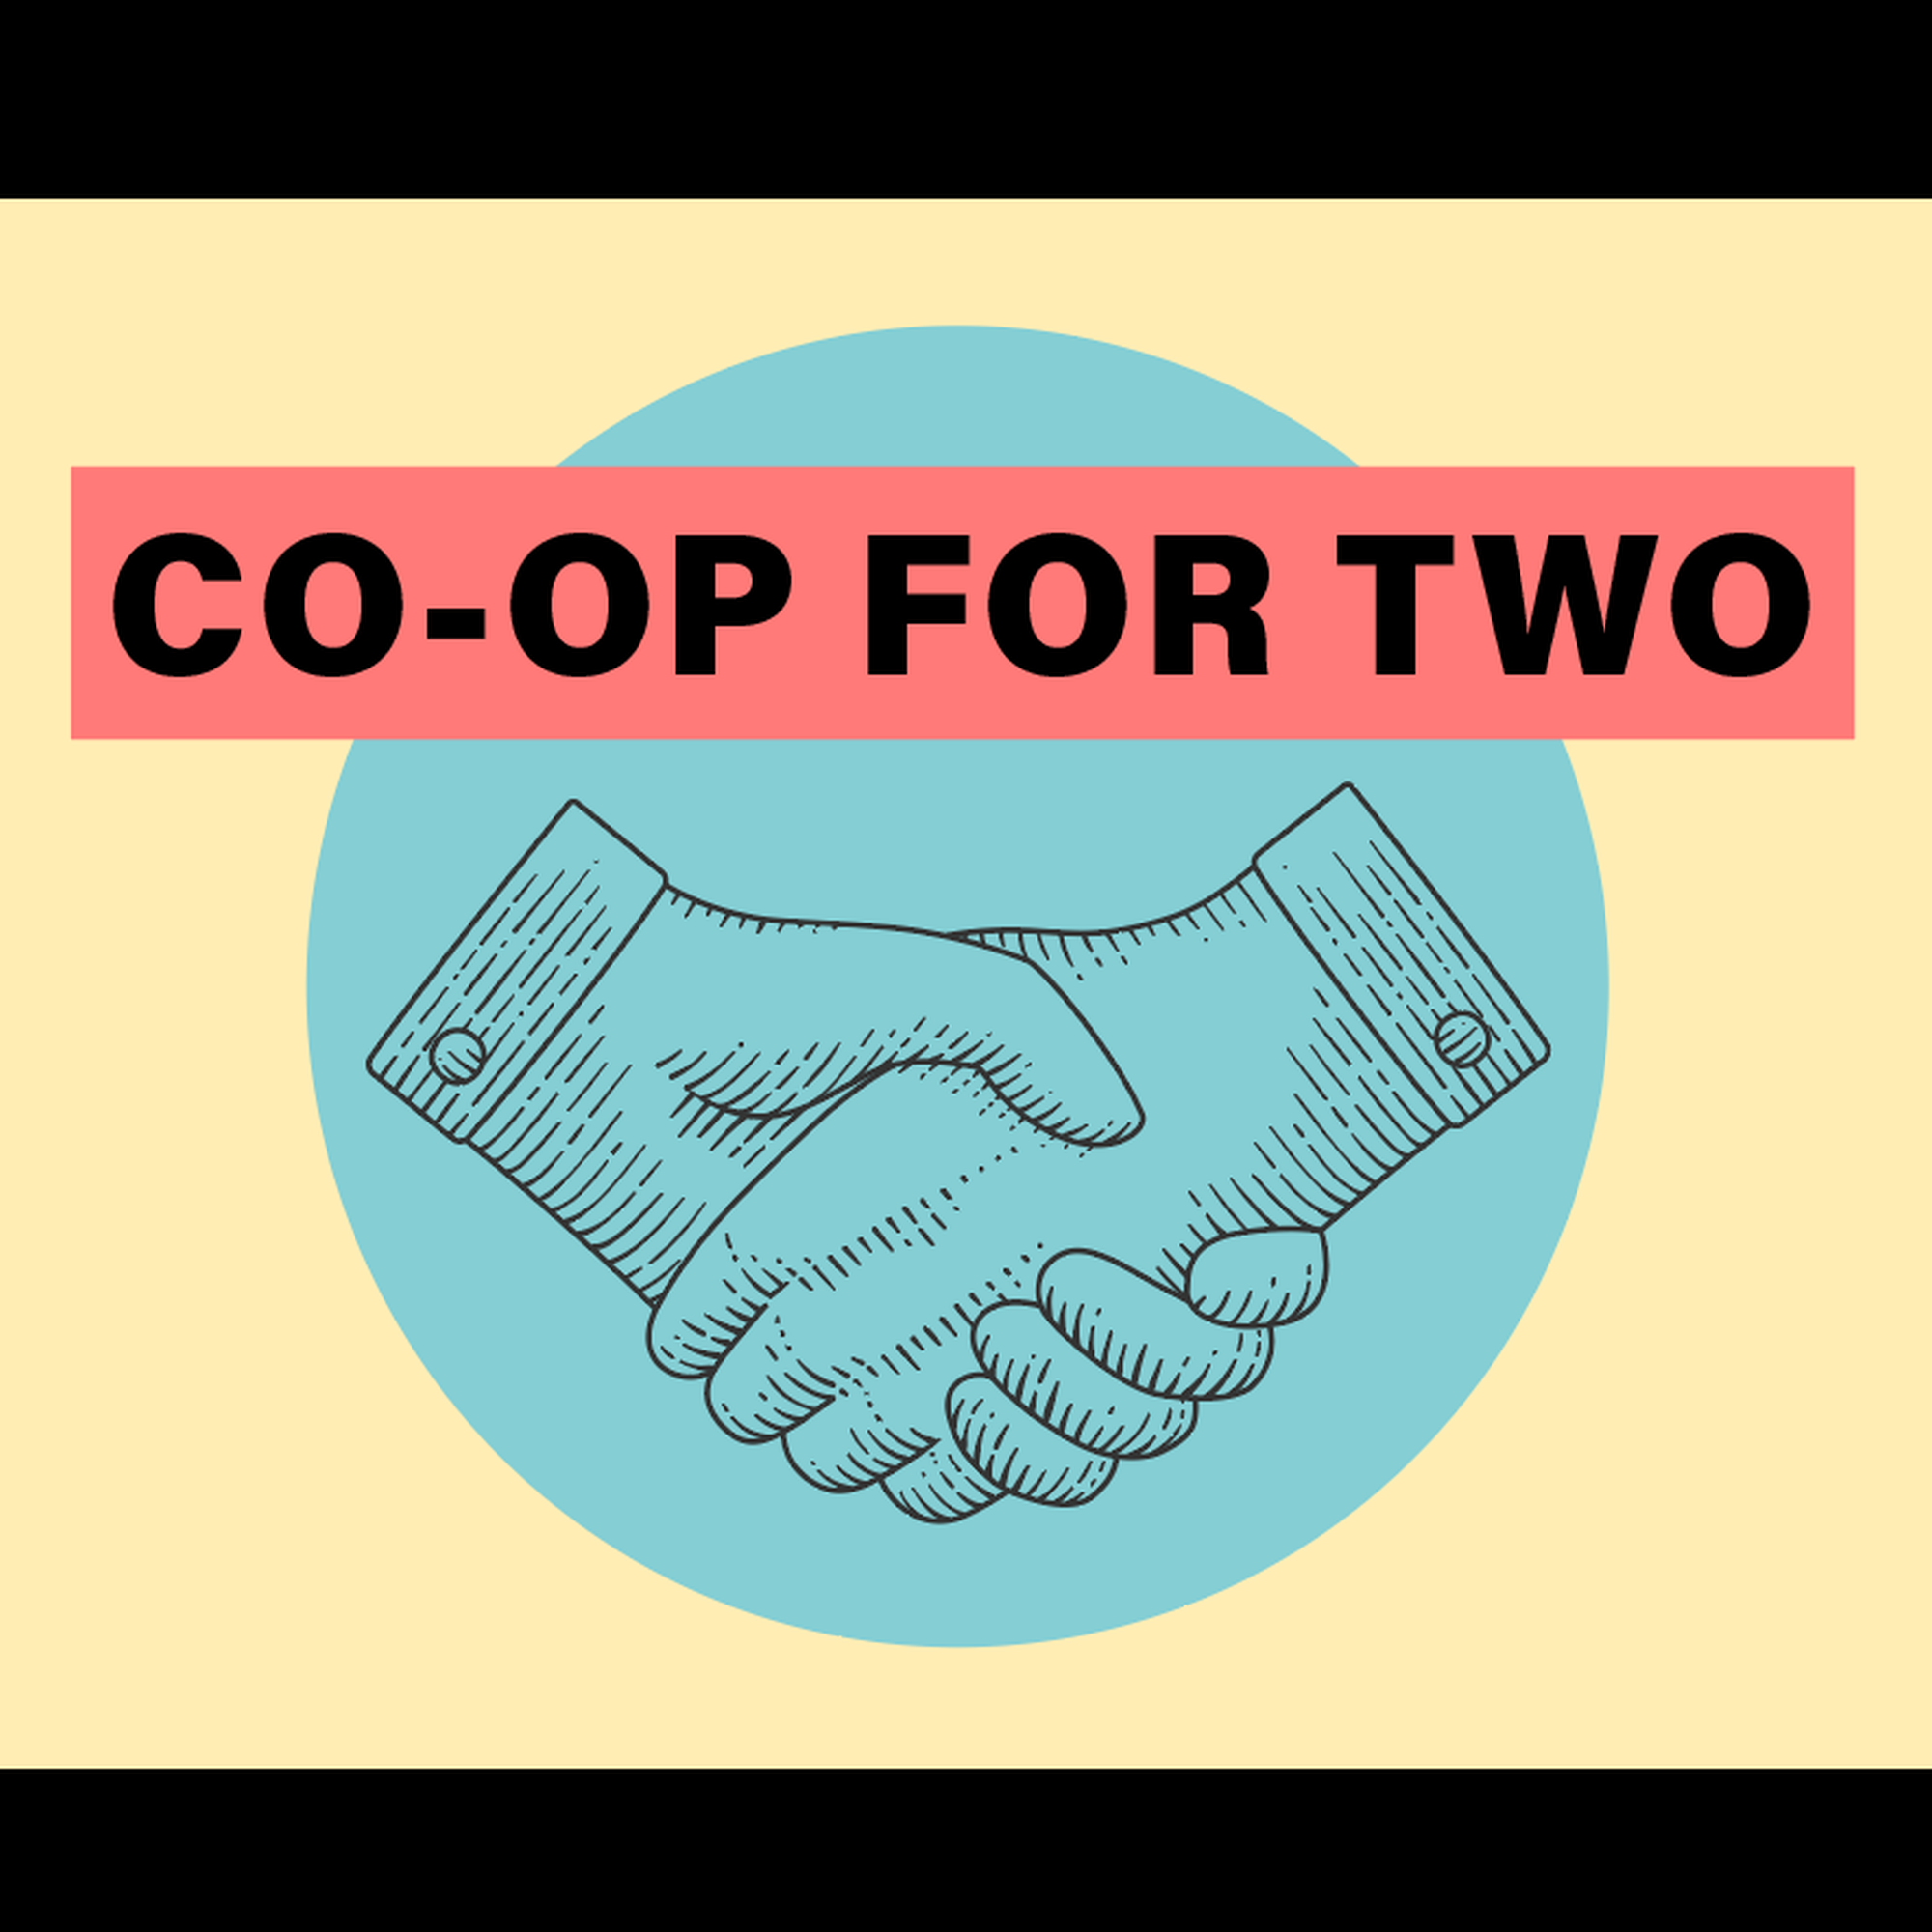 Two hands shaking eachother with the word "Co-Op for Two" in a banner across the top